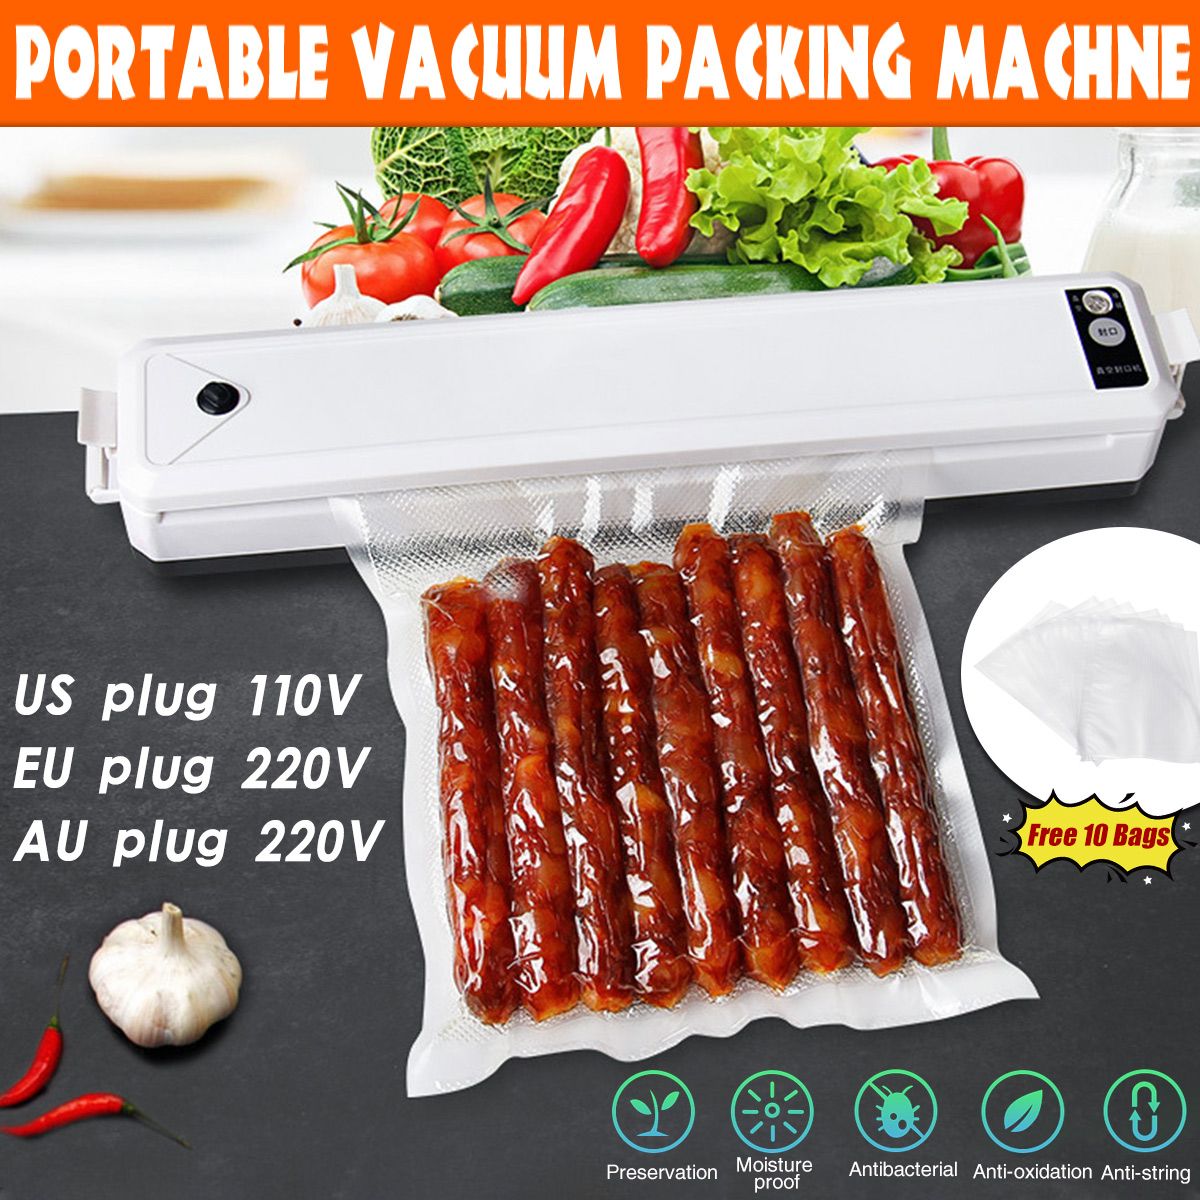 Household-Automatic-Vacuum-Sealer-Food-Packing-Machine--10x-Storage-Bags-1638816